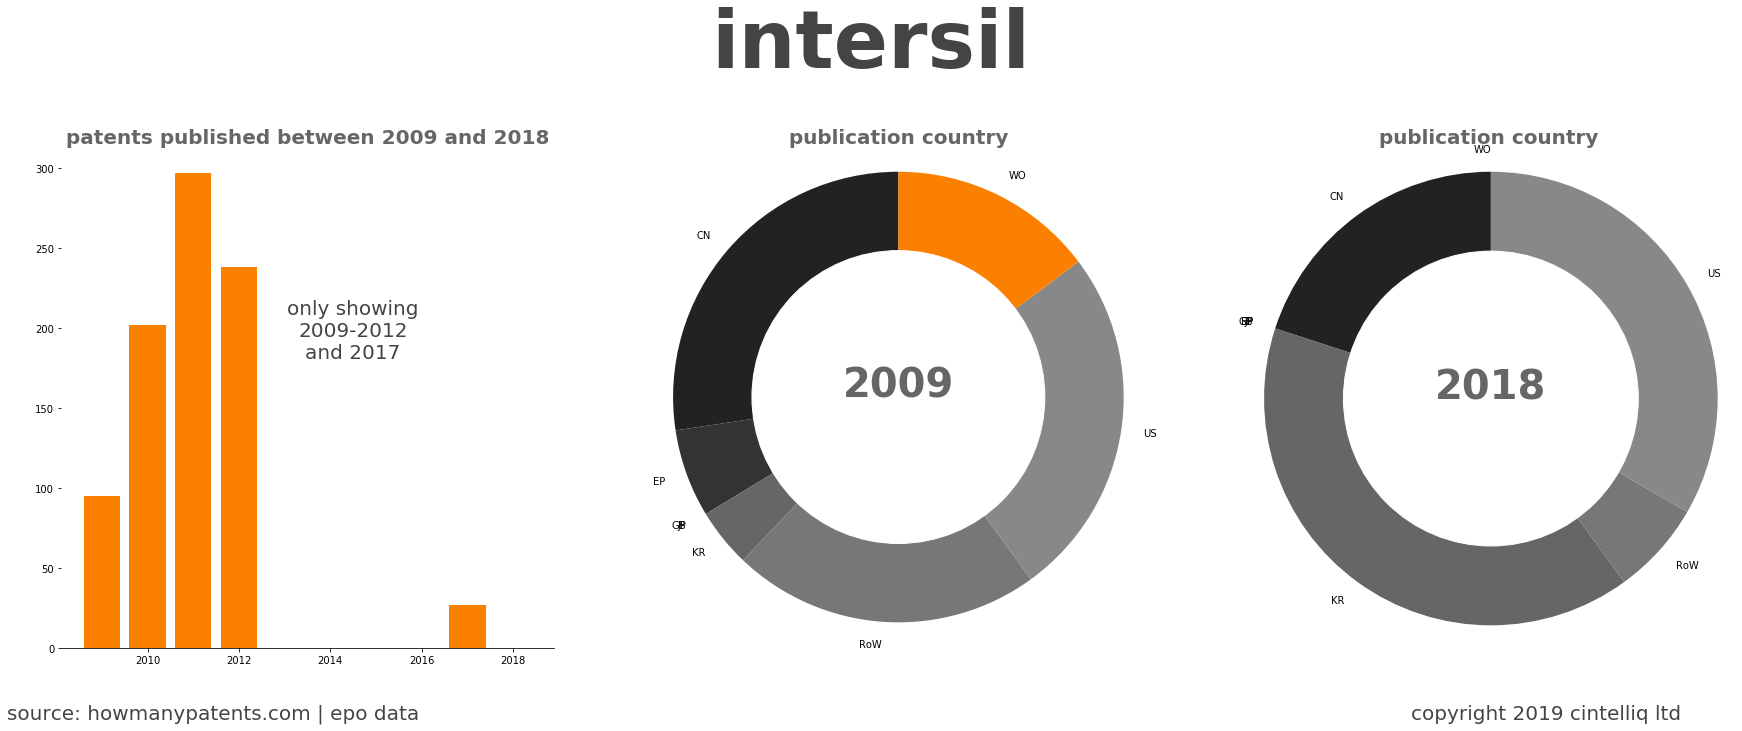 summary of patents for Intersil